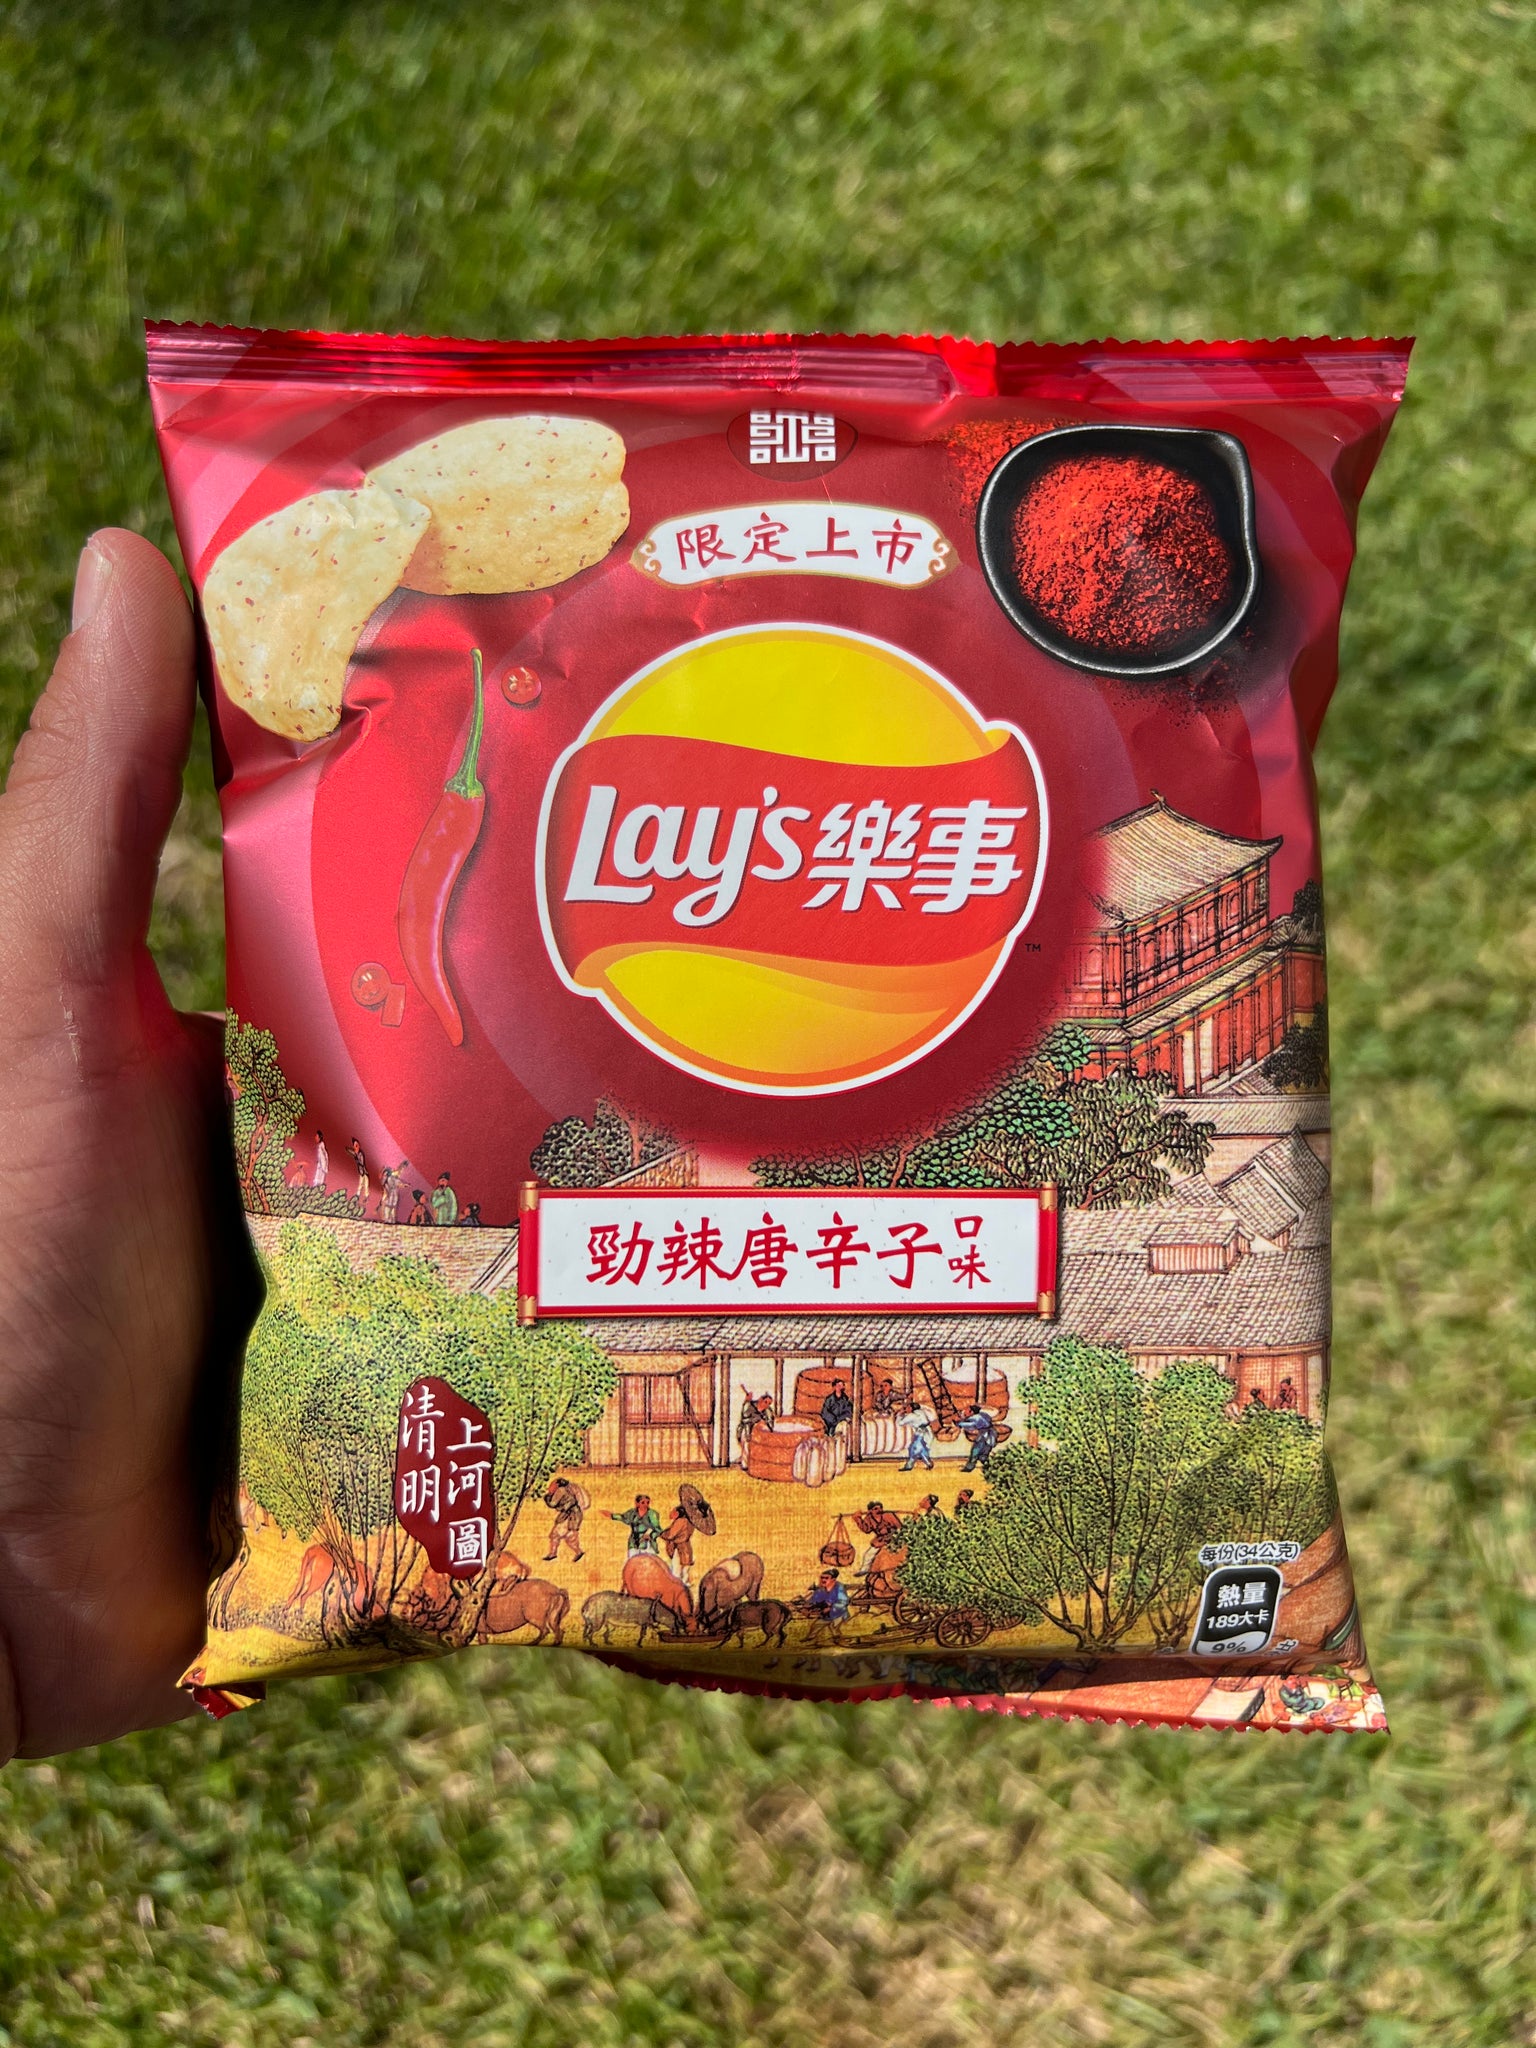 Lays Tangy Spicy (Taiwan)